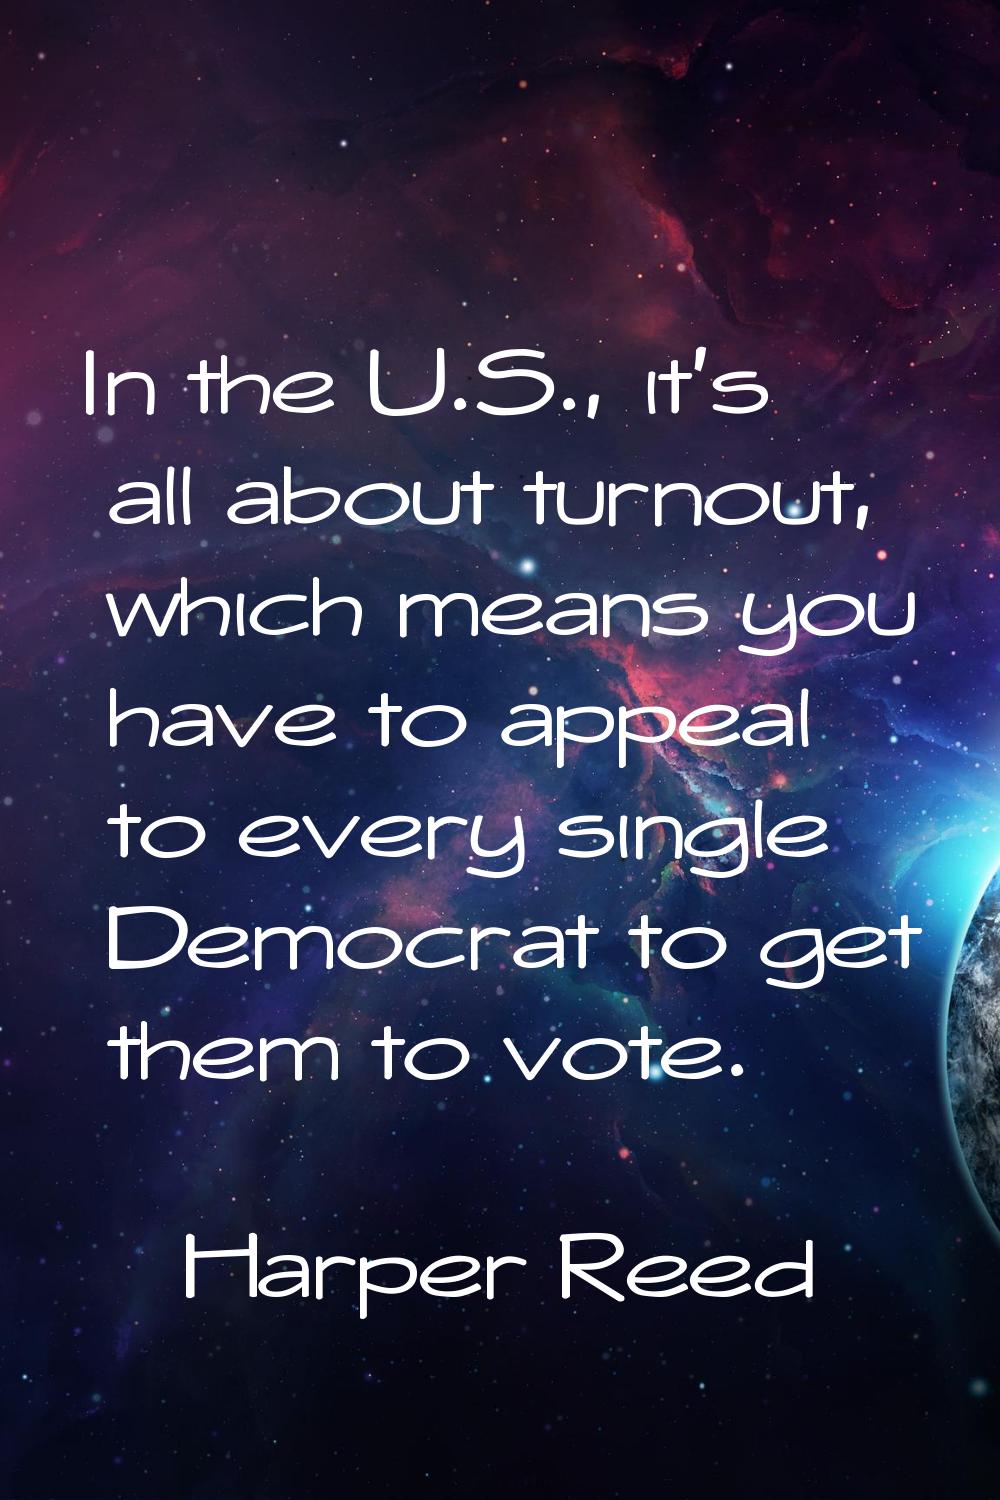 In the U.S., it's all about turnout, which means you have to appeal to every single Democrat to get